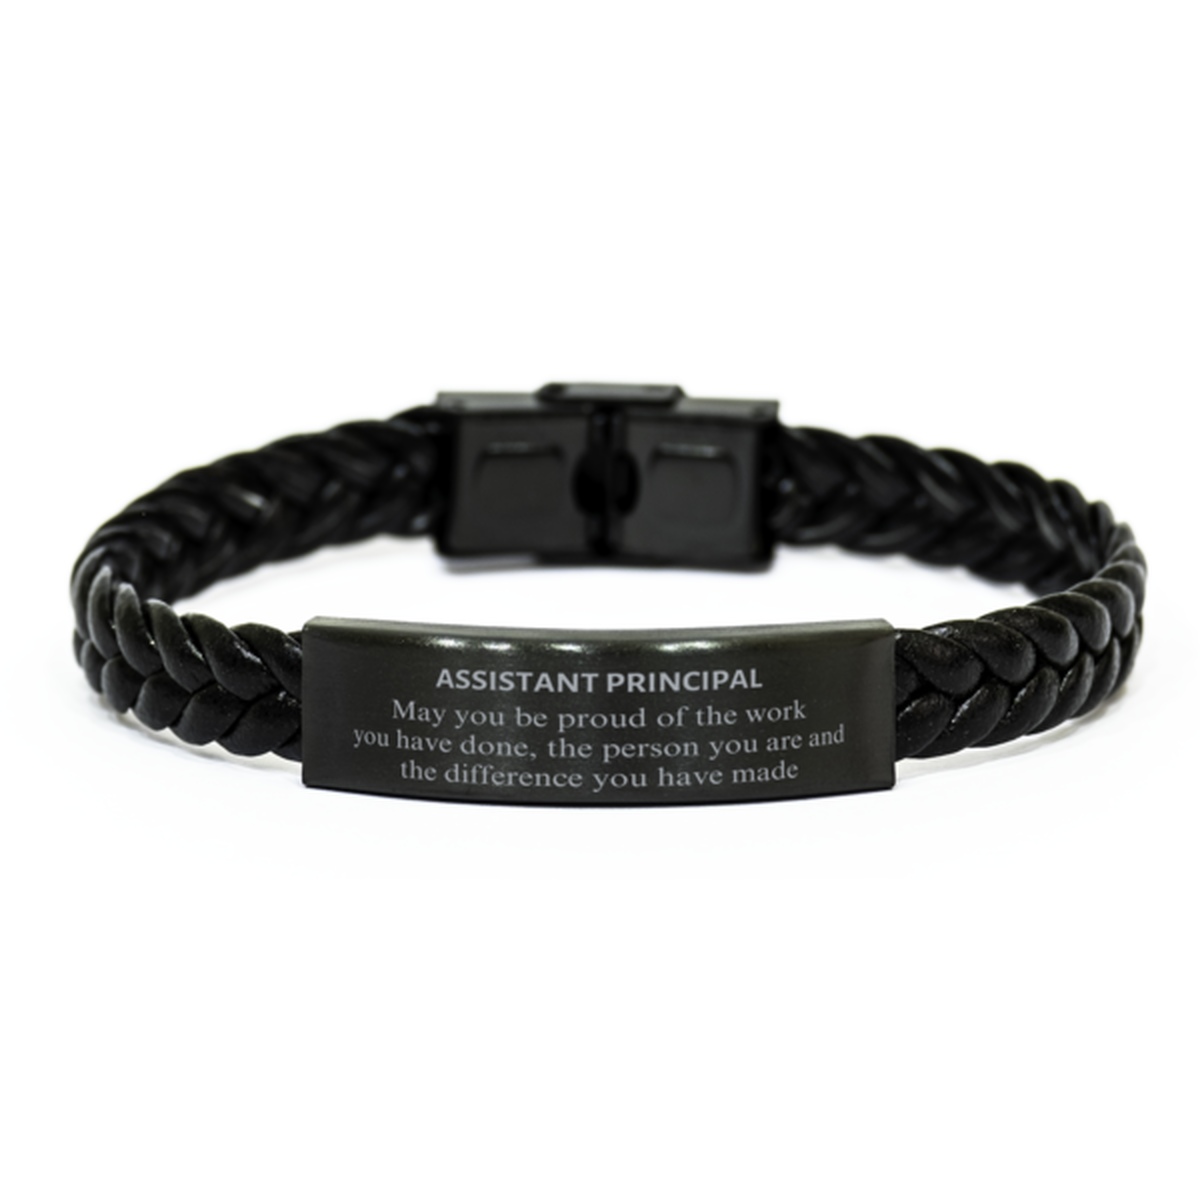 Assistant Principal May you be proud of the work you have done, Retirement Assistant Principal Braided Leather Bracelet for Colleague Appreciation Gifts Amazing for Assistant Principal